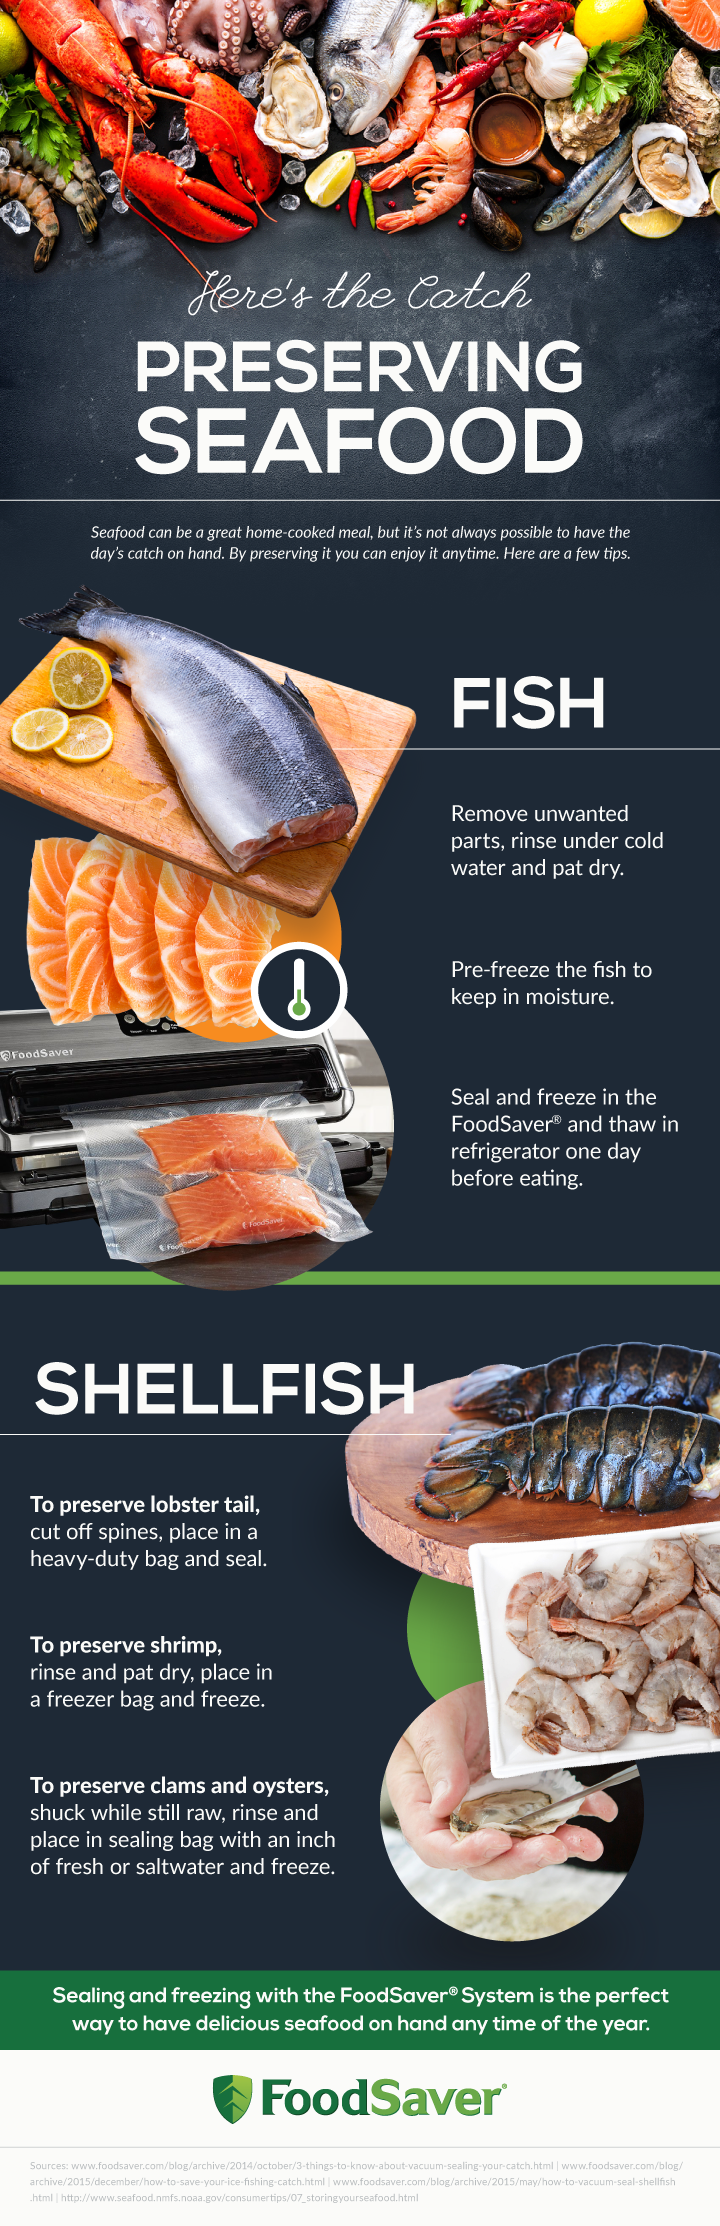 With the right tools, your seafood can stay fresh for longer.